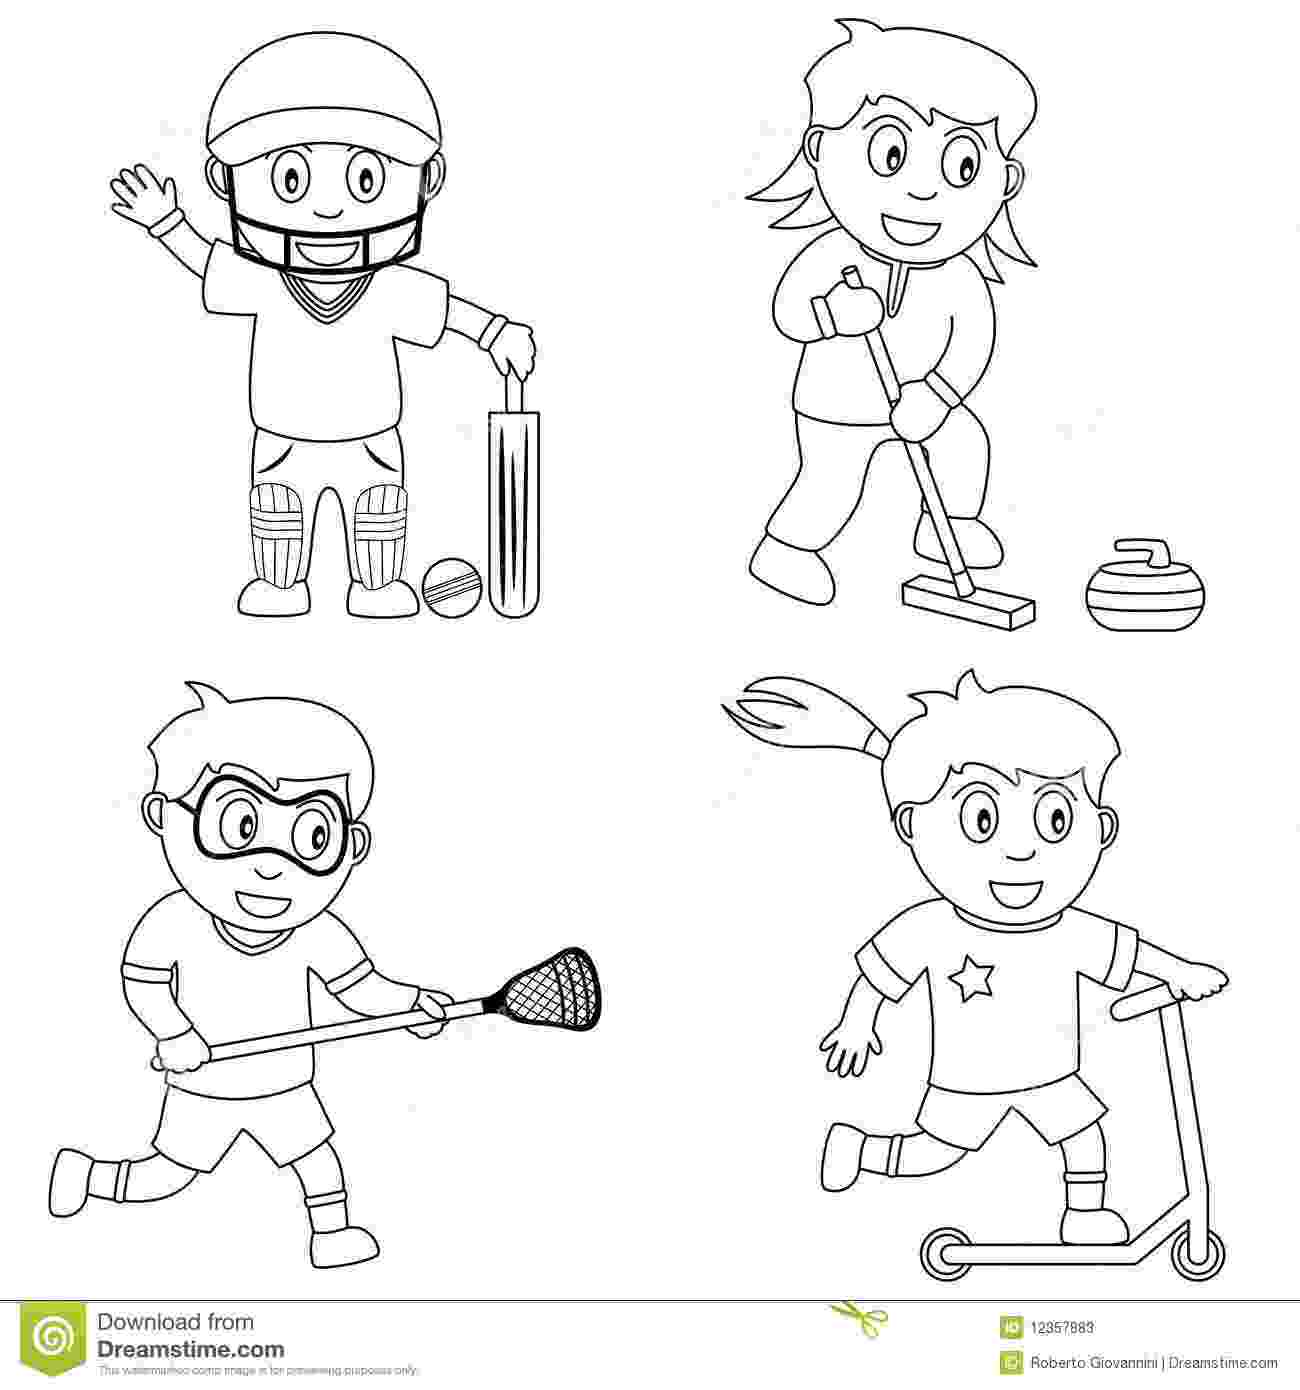 sports colouring coloring sport for kids 6 stock vector illustration of sports colouring 